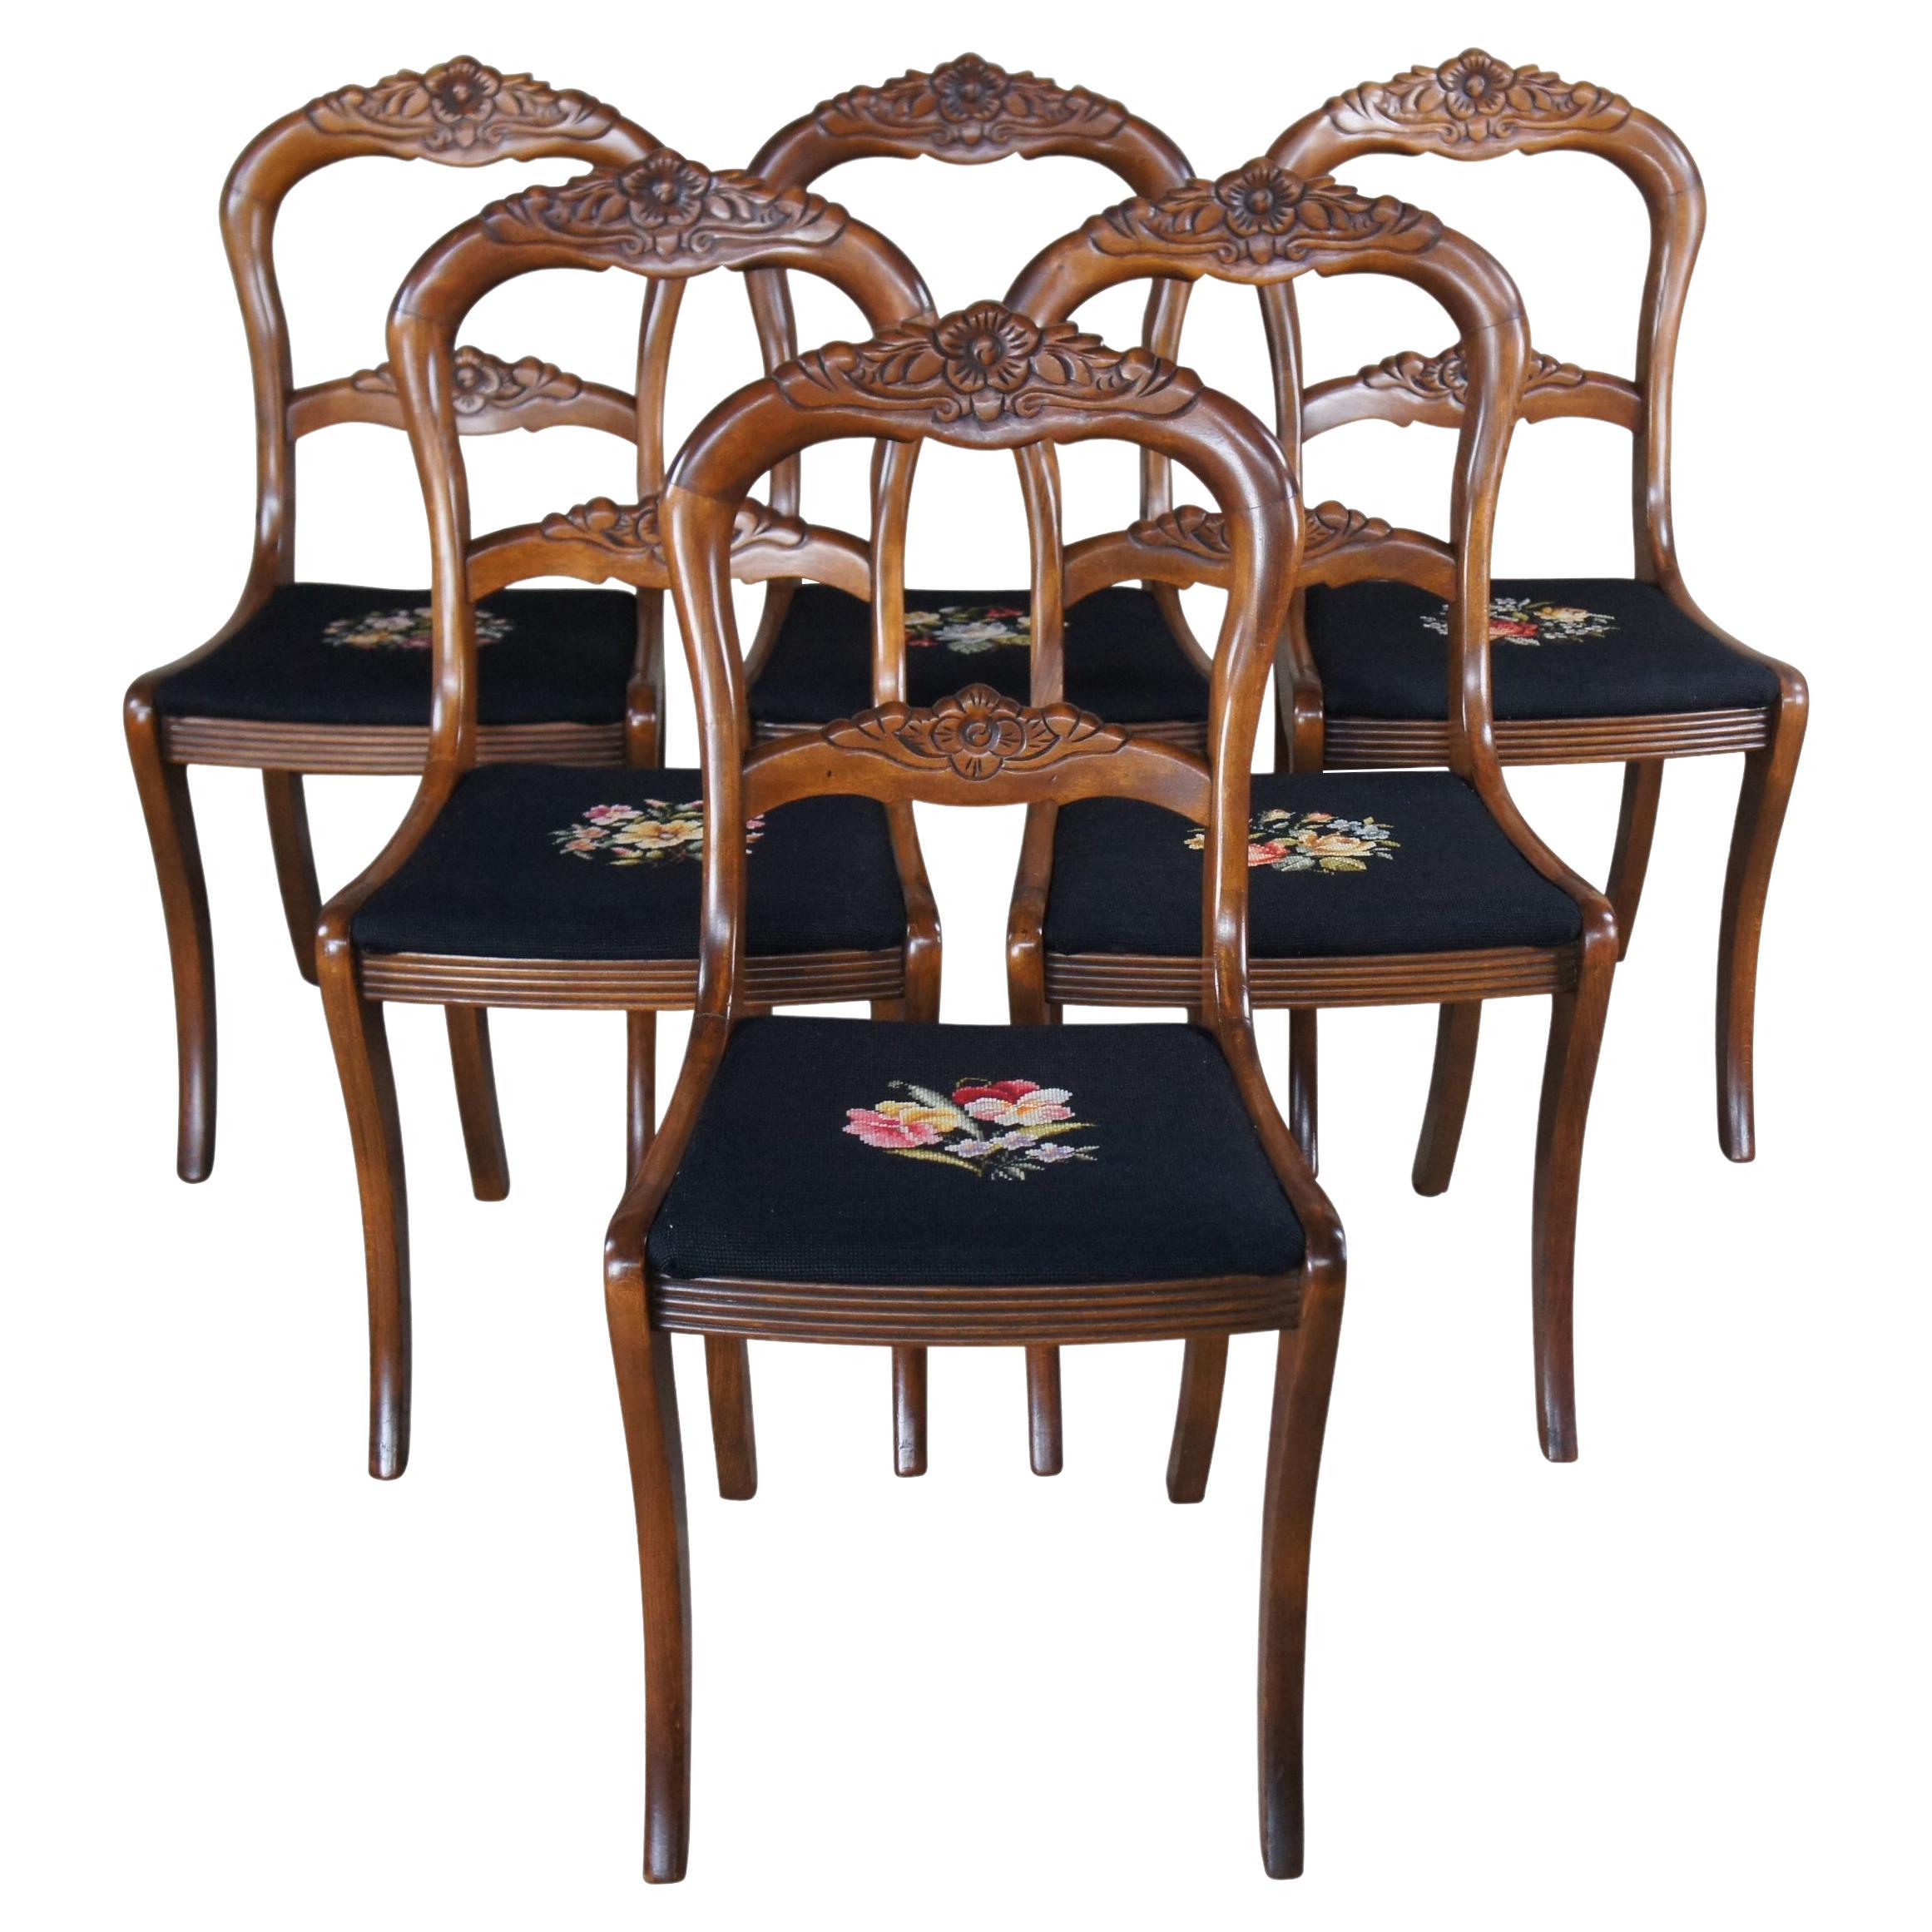 6 Tell City Balloon Back Carved Mahogany Floral Needlepoint Dining Chairs